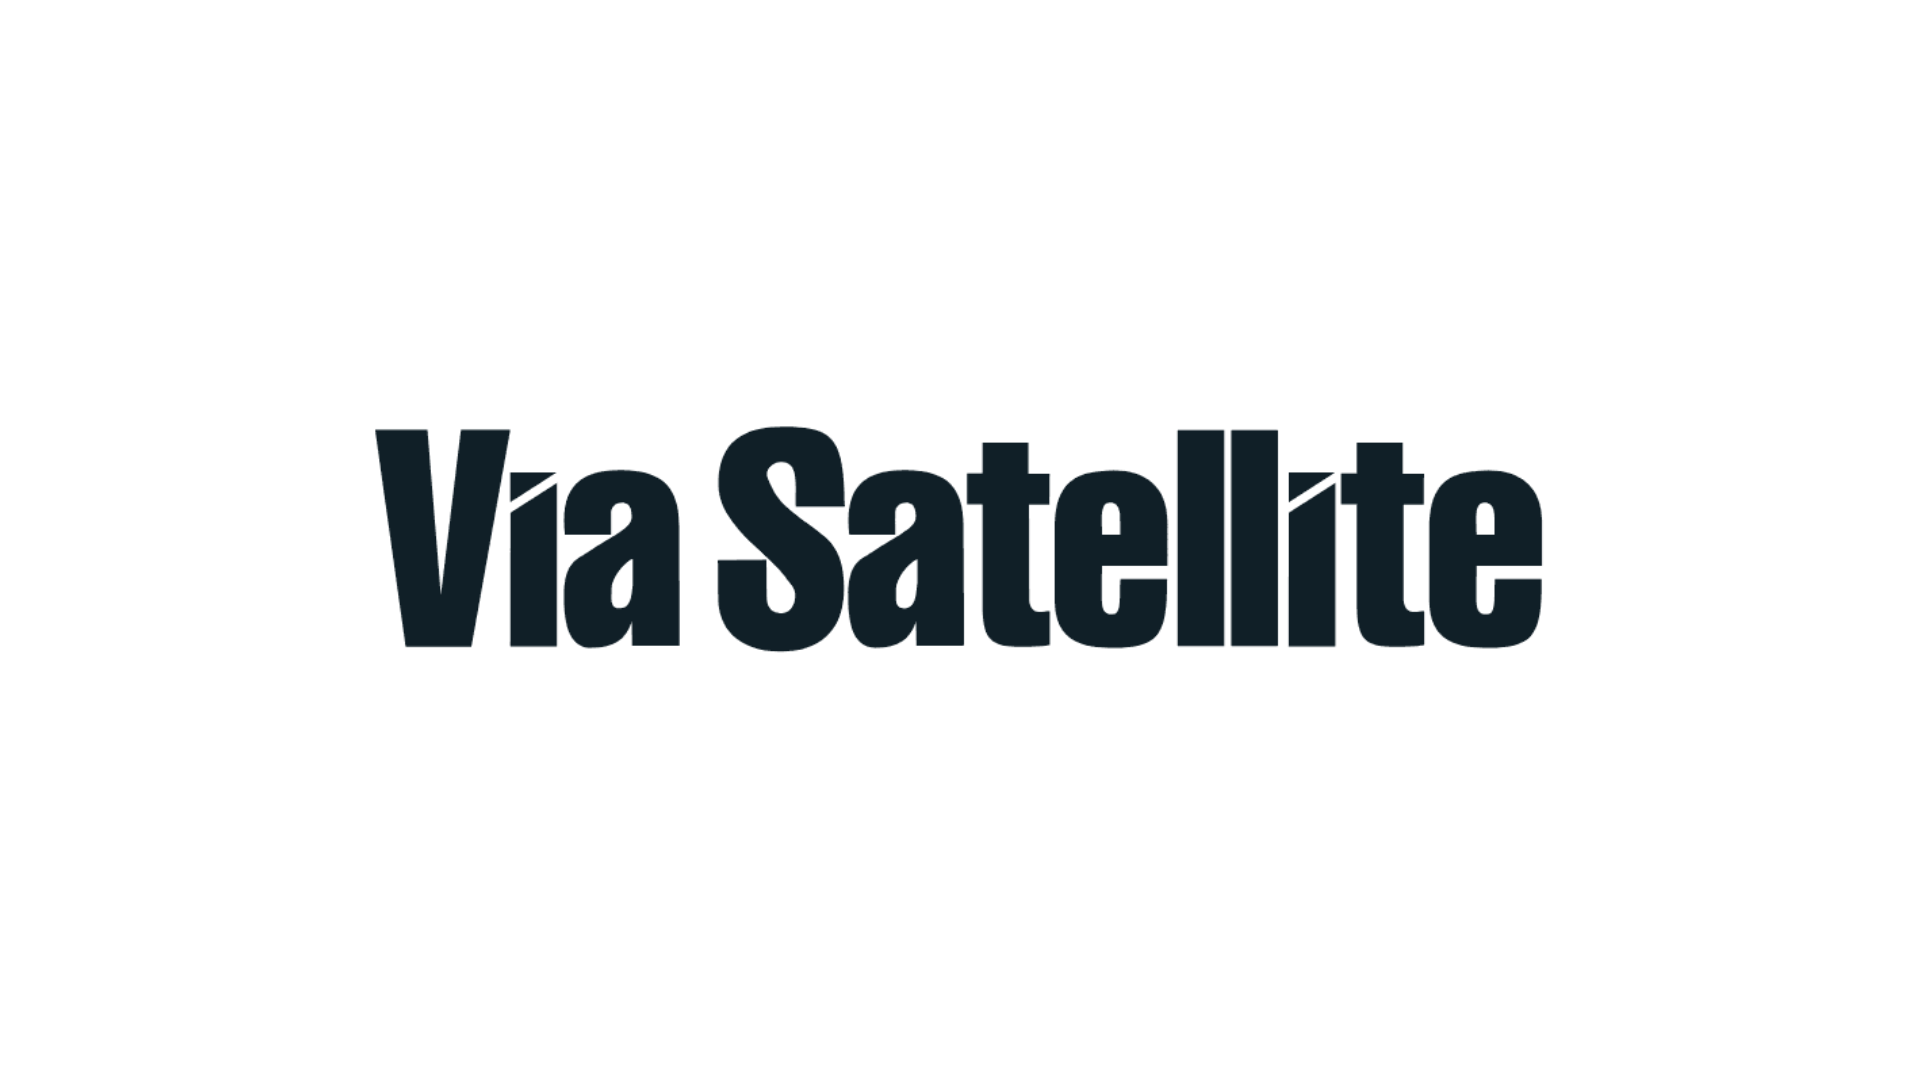 Via Satellite | Access Partnership Analyst Suarez Sees Opportunity in Risk-Averse Environment